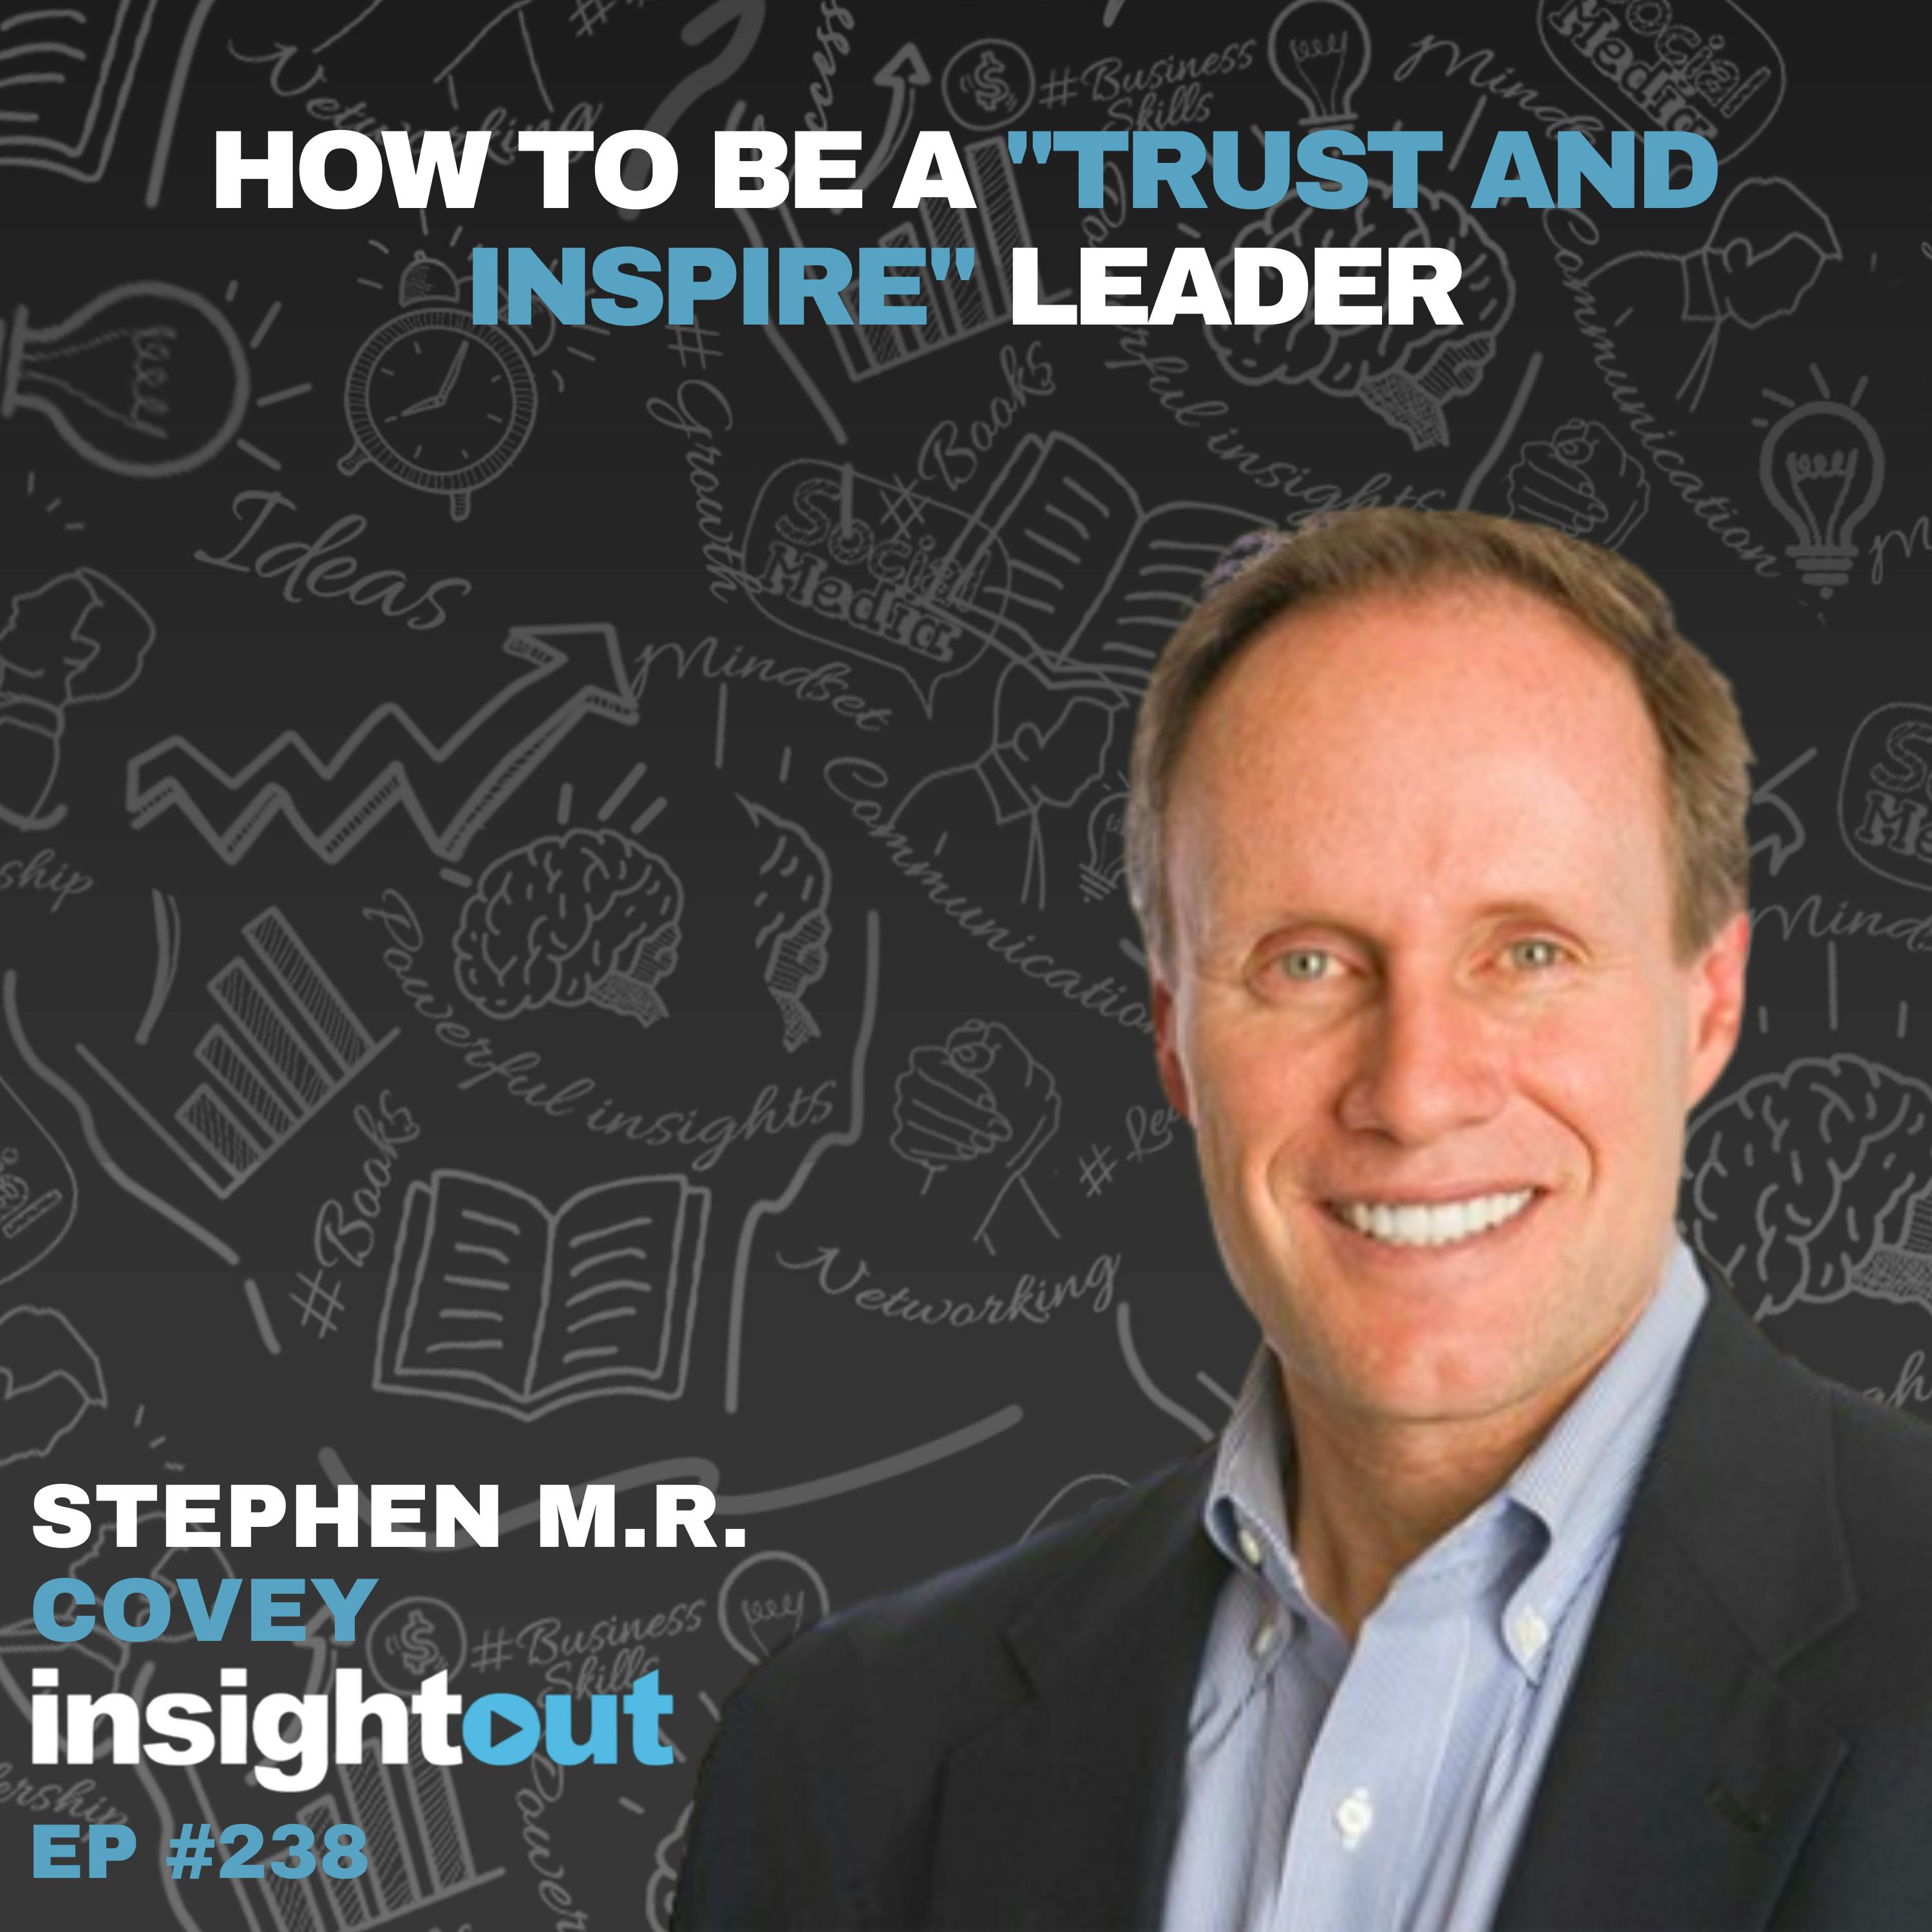 How to Be a ”Trust & Inspire” Leader with Stephen M.R. Covey